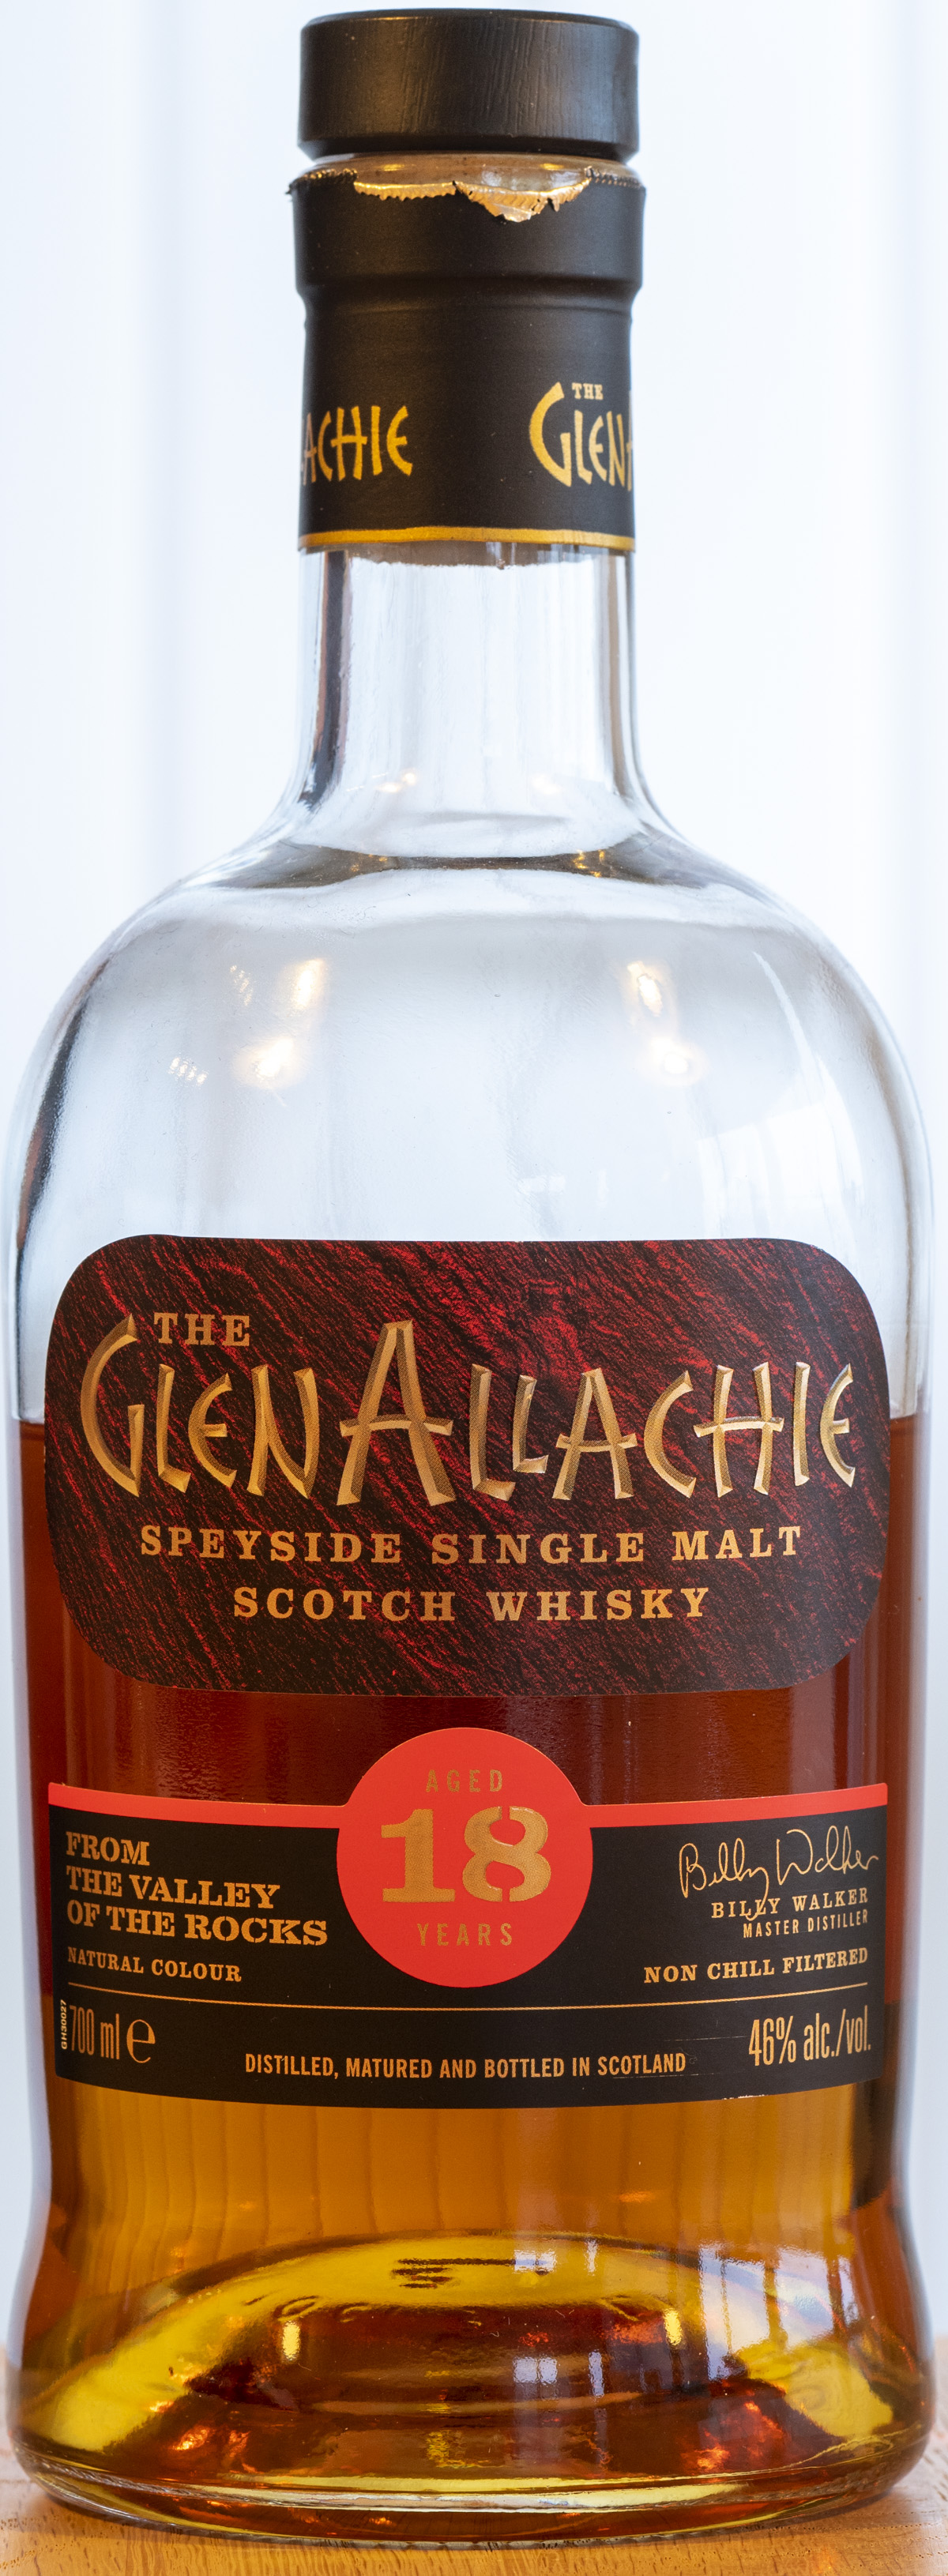 Billede: PHC_3945 - The GlenAllachie 18 Years Old - front.jpg